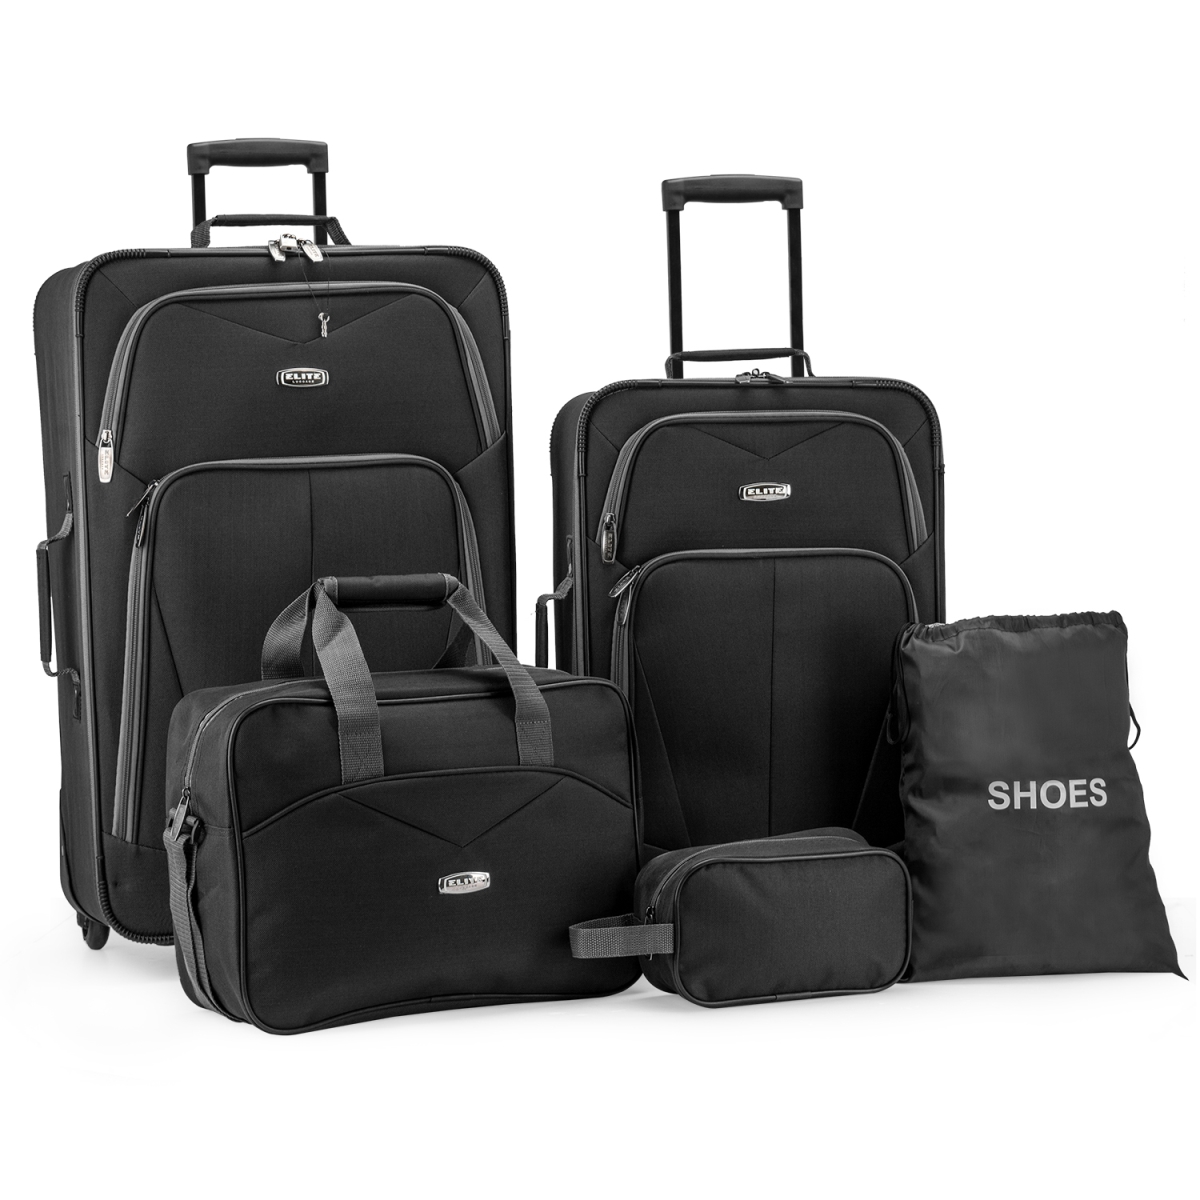 Picture of Elite Luggage EL08094K Whitfield 5 Piece Softside Lightweight Rolling Luggage Set, Black